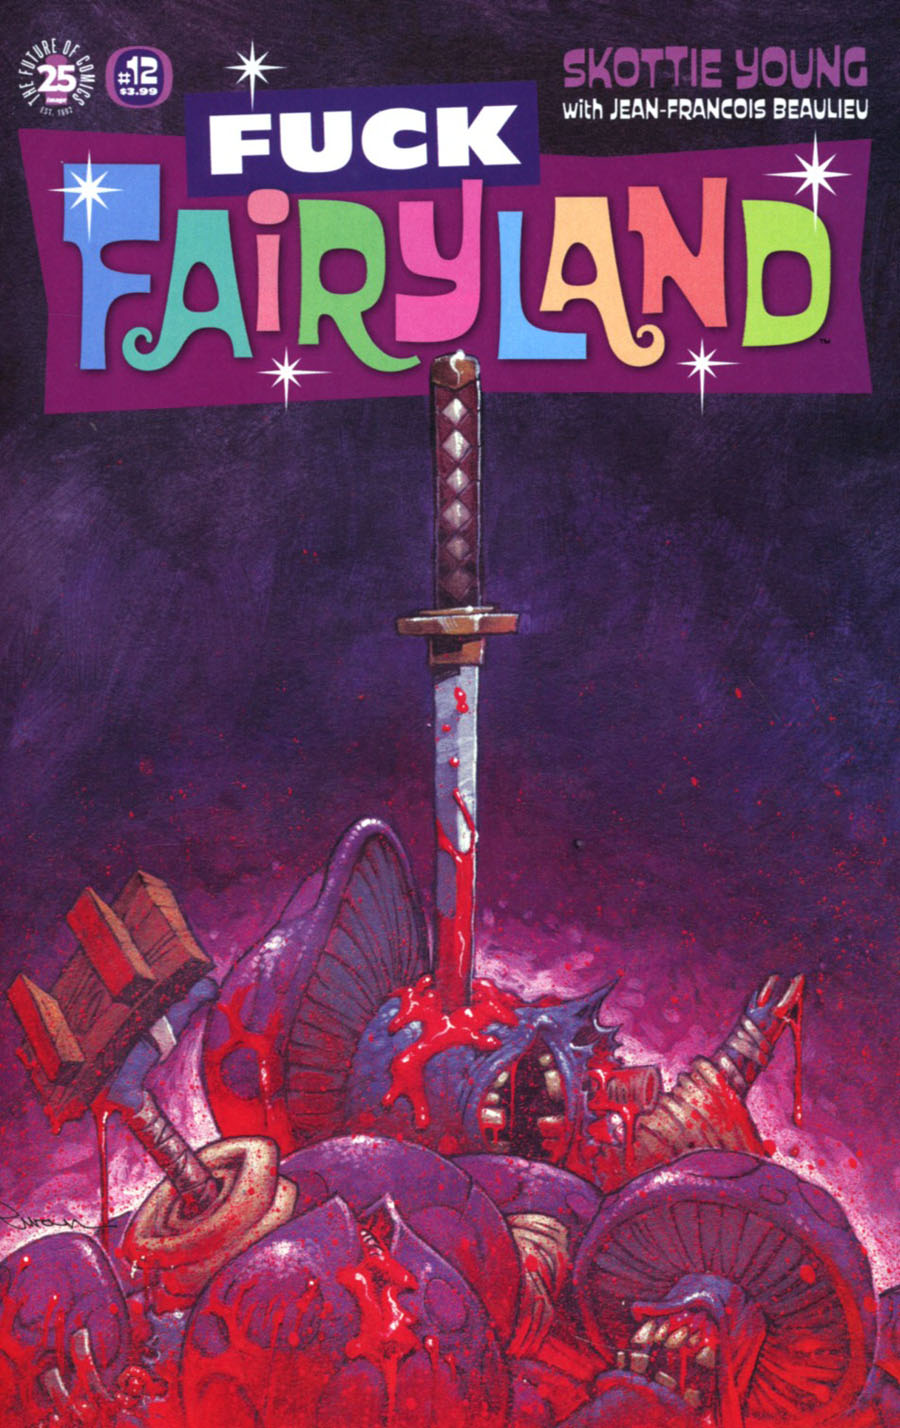 I Hate Fairyland #12 Cover B Variant Skottie Young F*ck Fairyland Cover